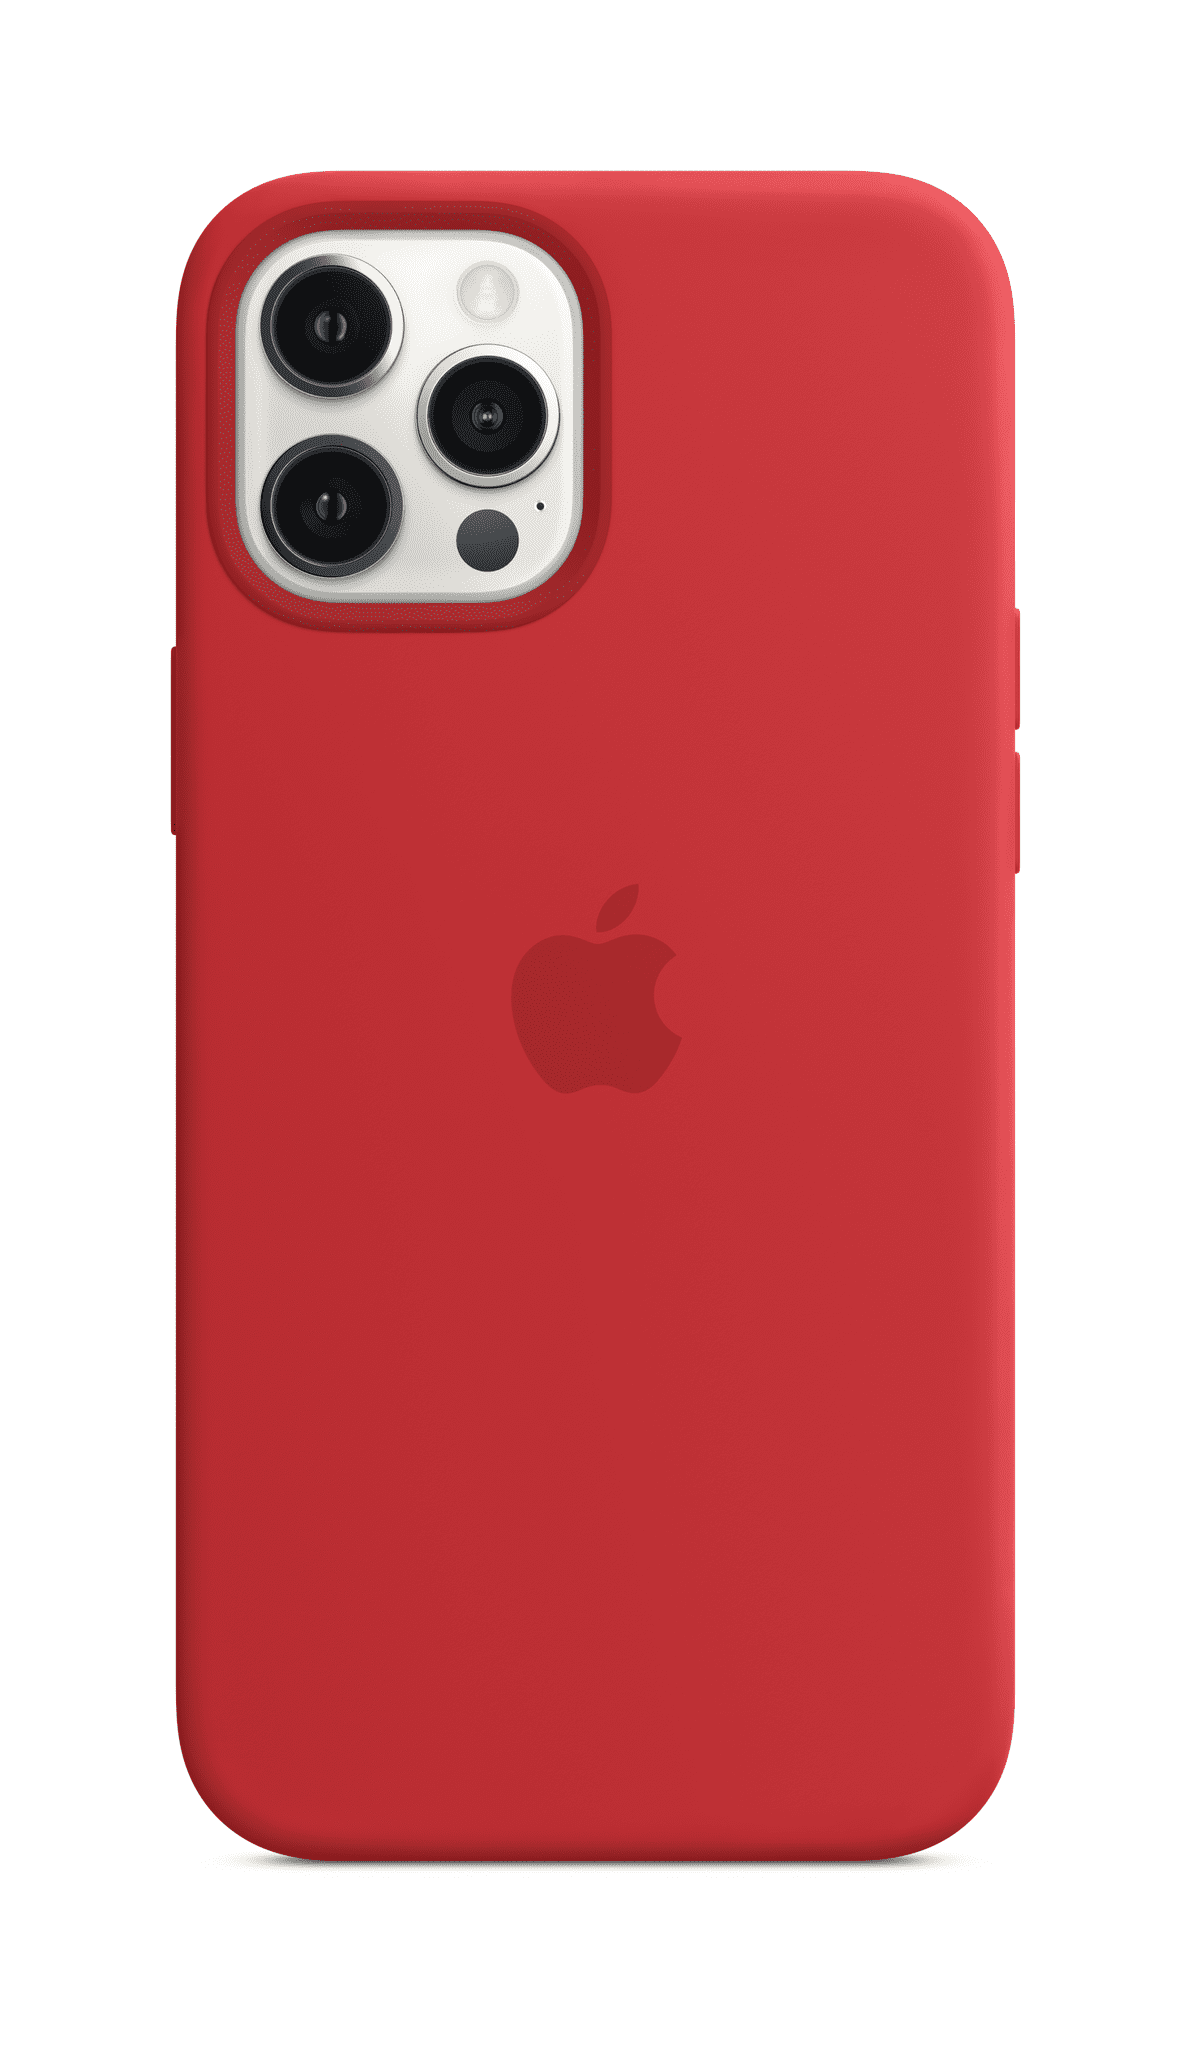 deres Banquet Berolige Apple iPhone 12 Pro Max Silicone Case with MagSafe - Red - Walmart.com